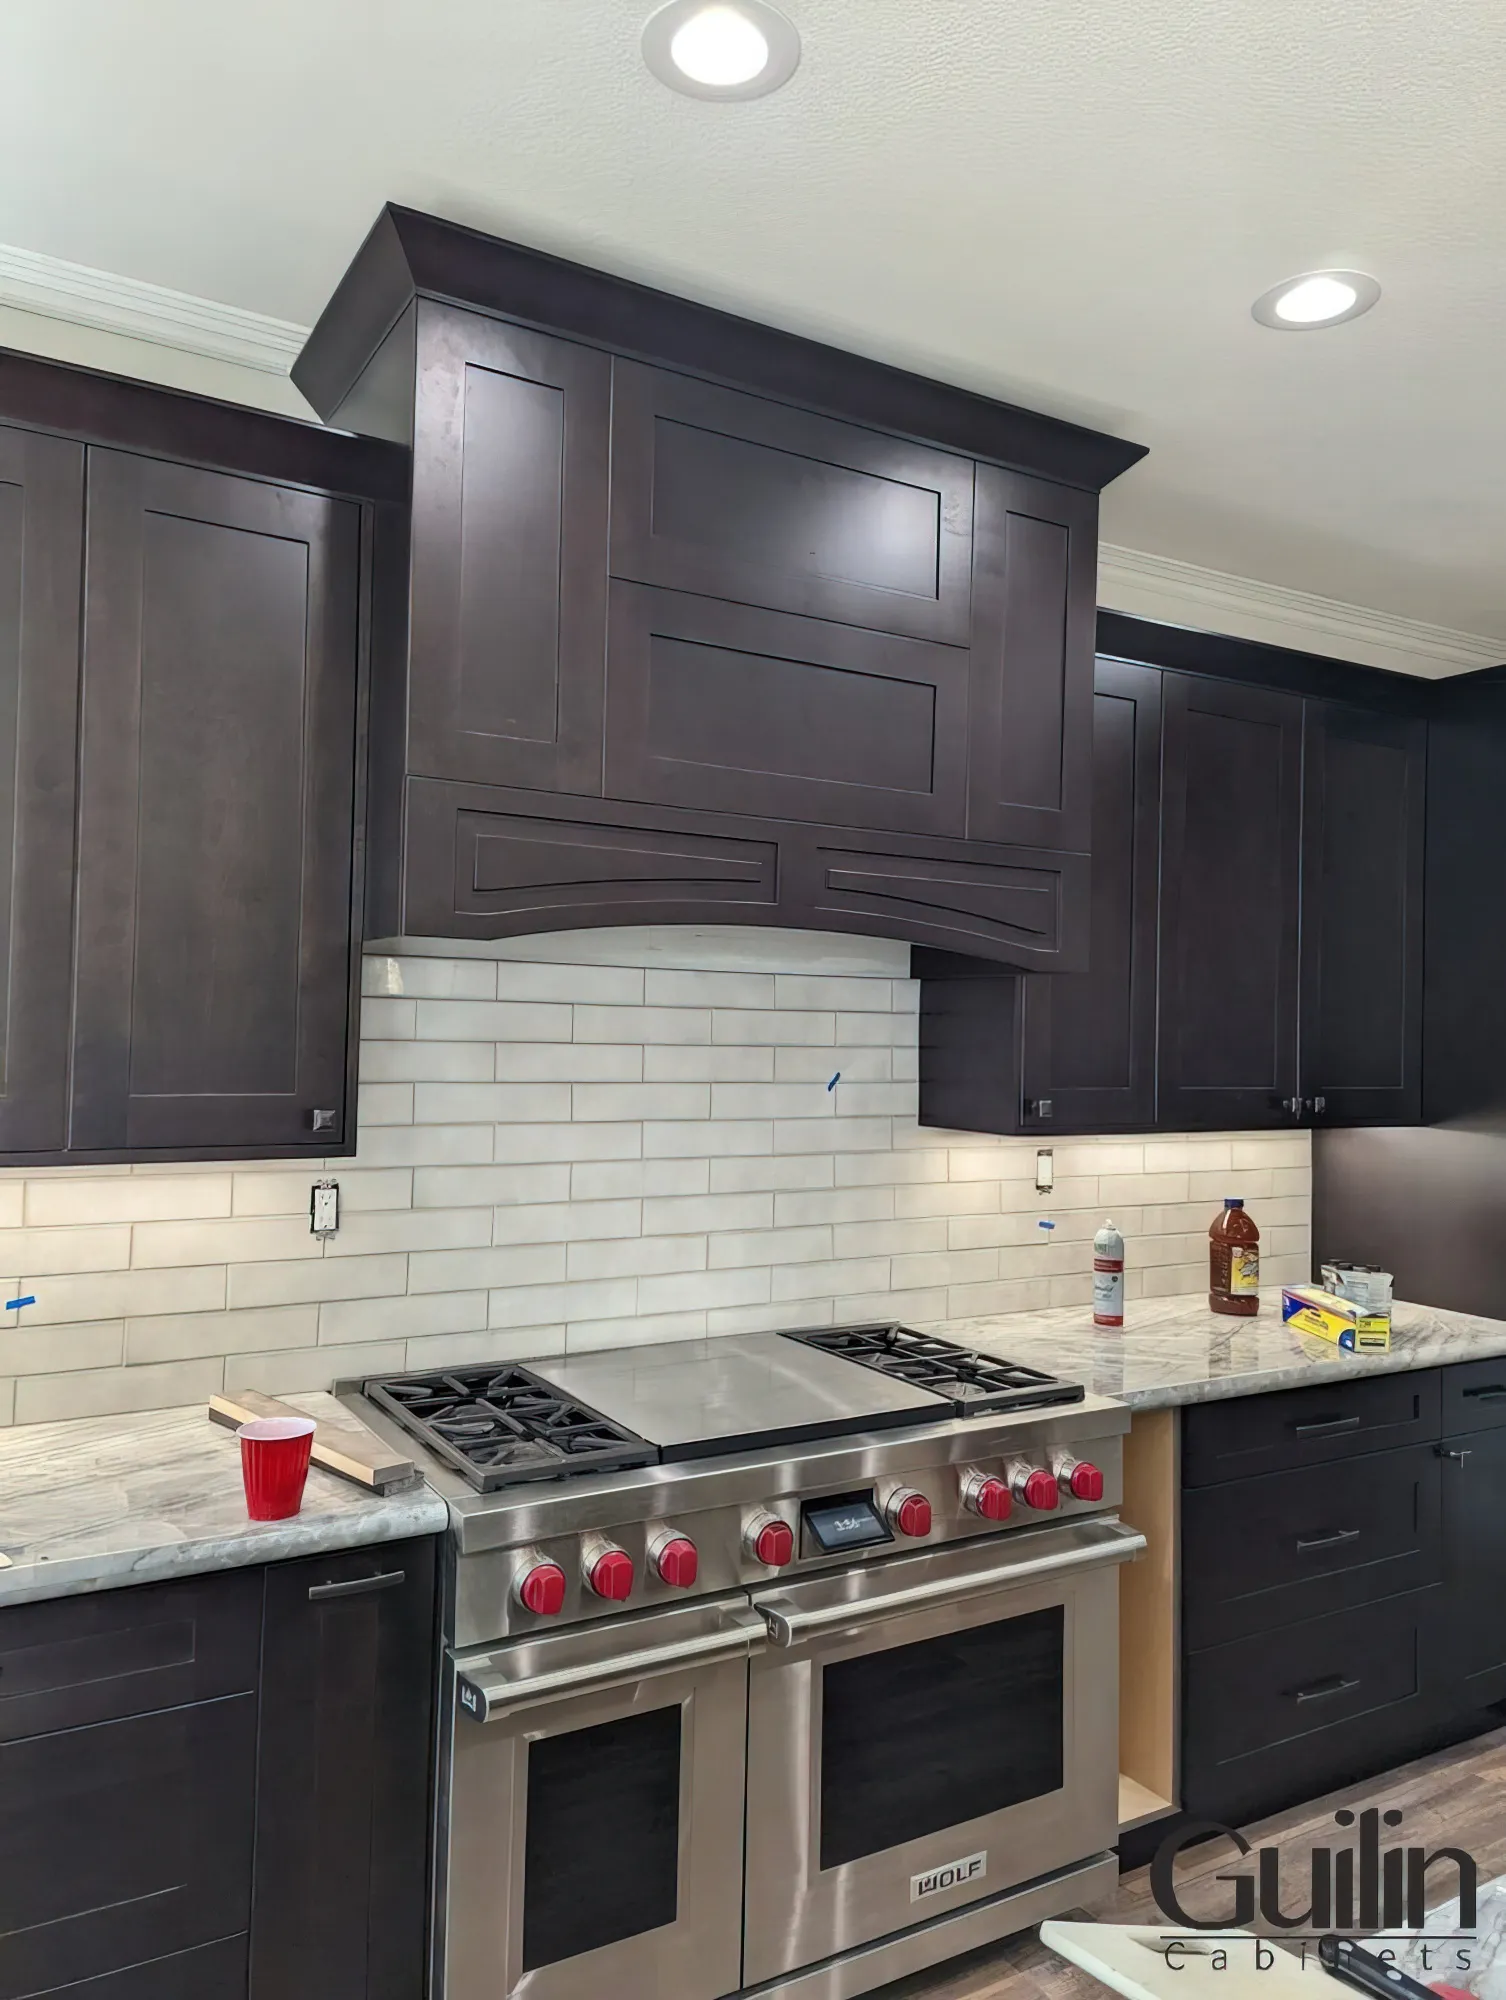 One Wall kitchen layout may be attractive and cost-effective, however, it is not the most suitable option for larger households or those who need more counter and storage space.